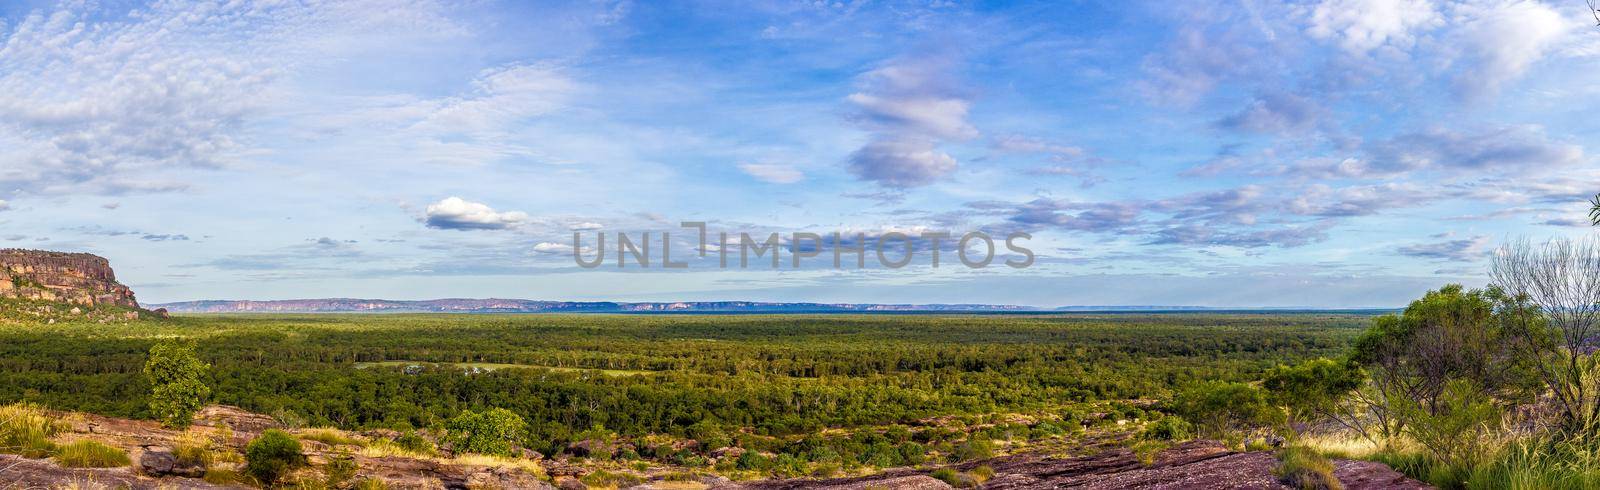 panorama from the Nadab Lookout in ubirr, kakadu national park - australia by bettercallcurry